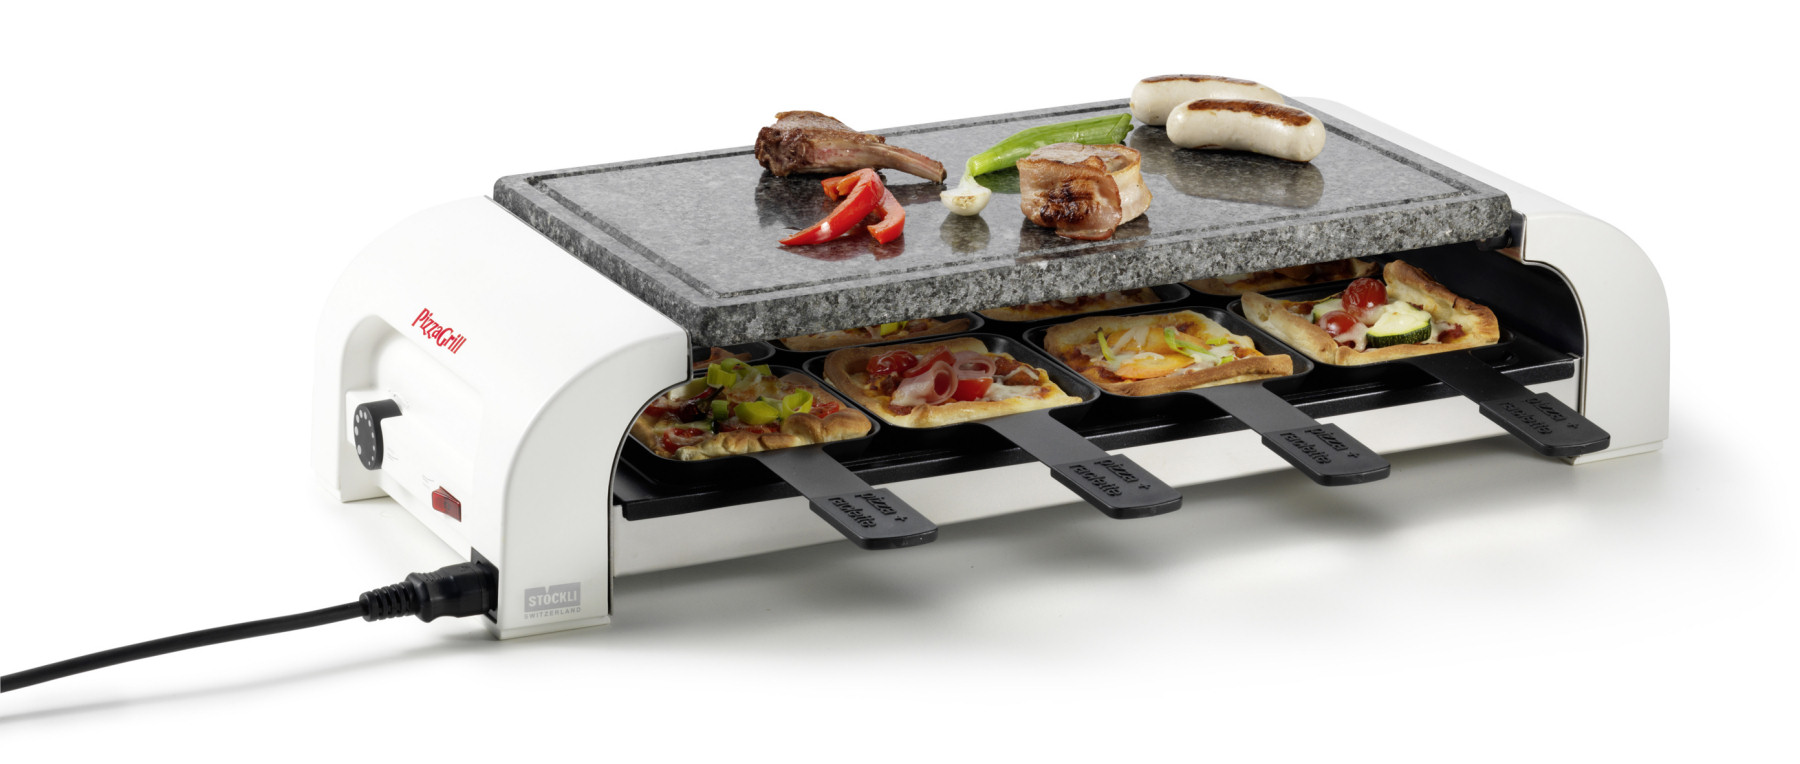 Appareil à raclette – « Stockli Hot´Stone for 8 »